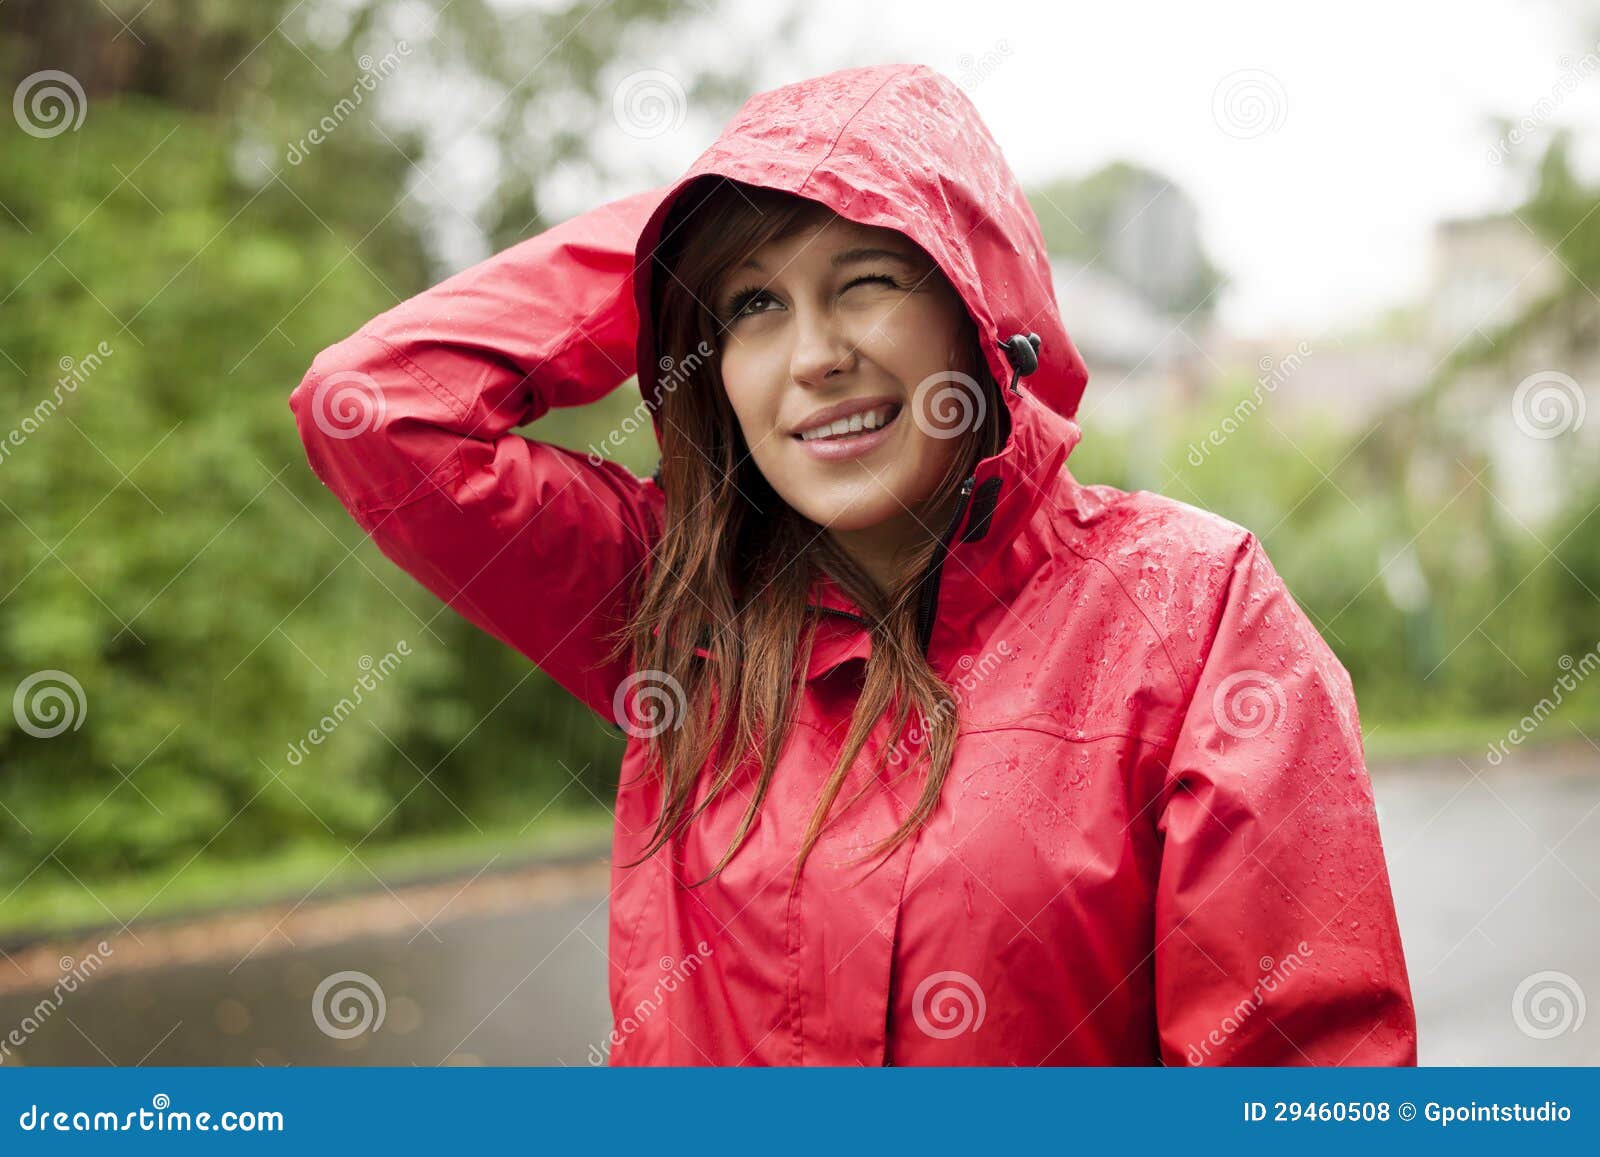 Checking for rain stock photo. Image of clothing, care - 29460508